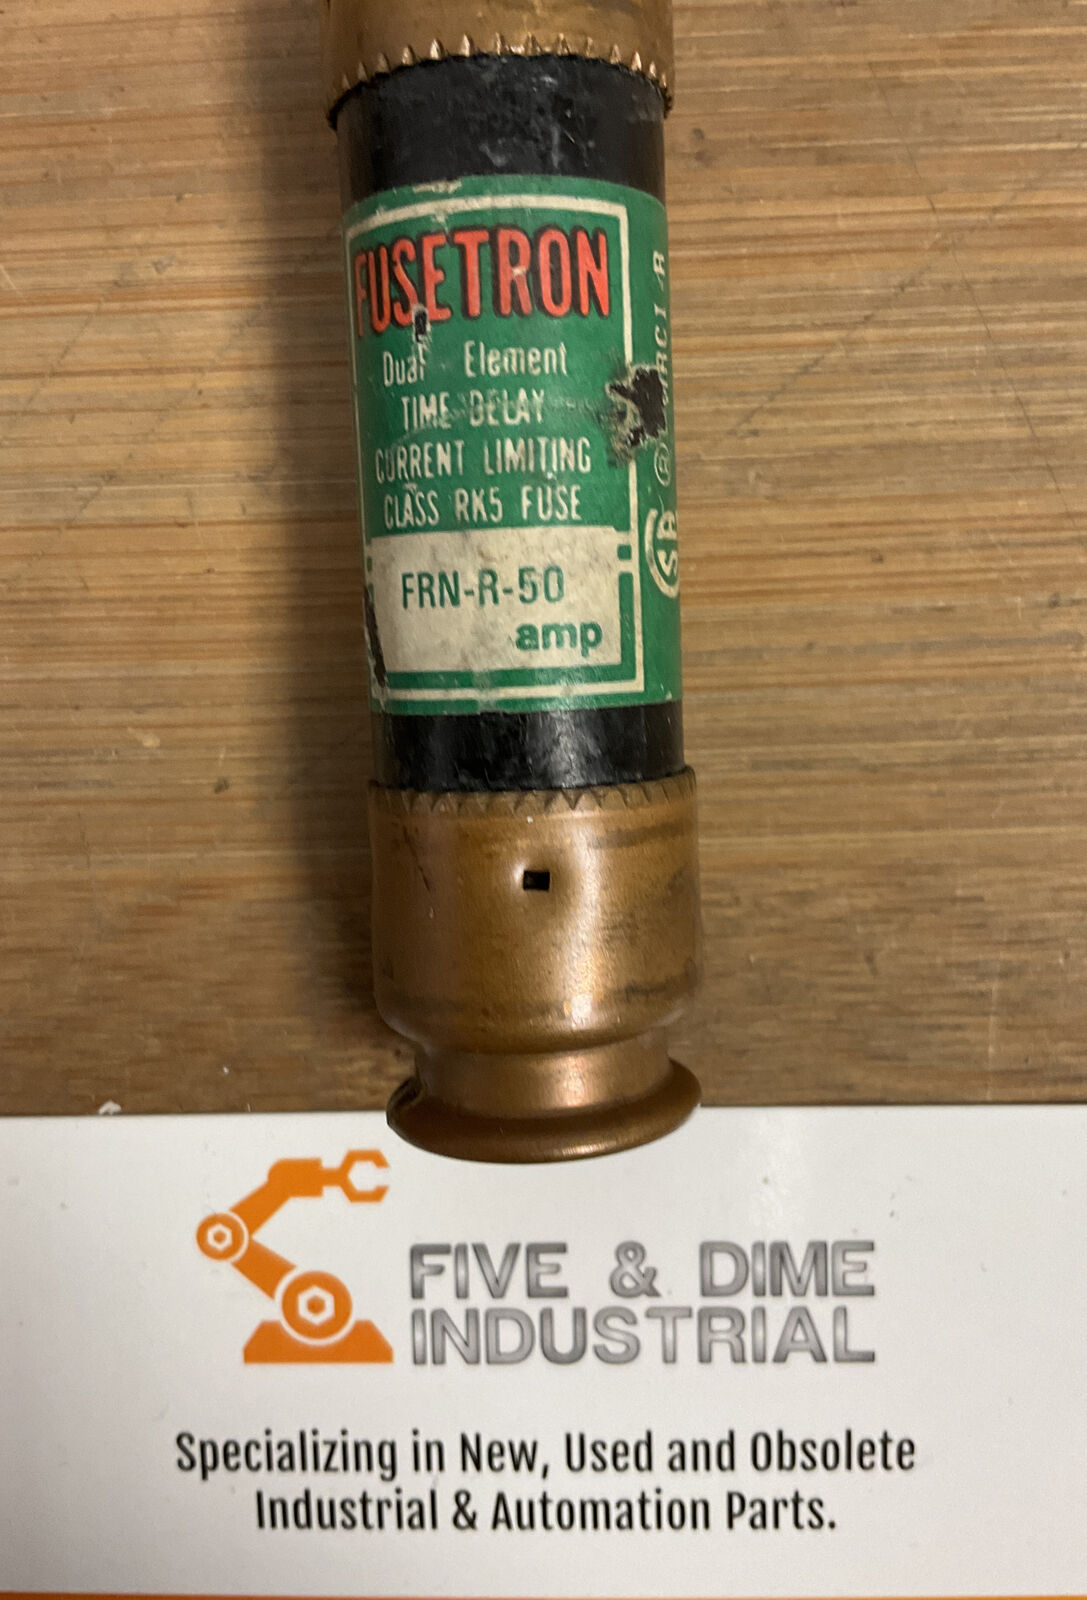 Fusetron FRN-R-50 Lot of 5  Fuse Duel Element Time Delay (BL116)